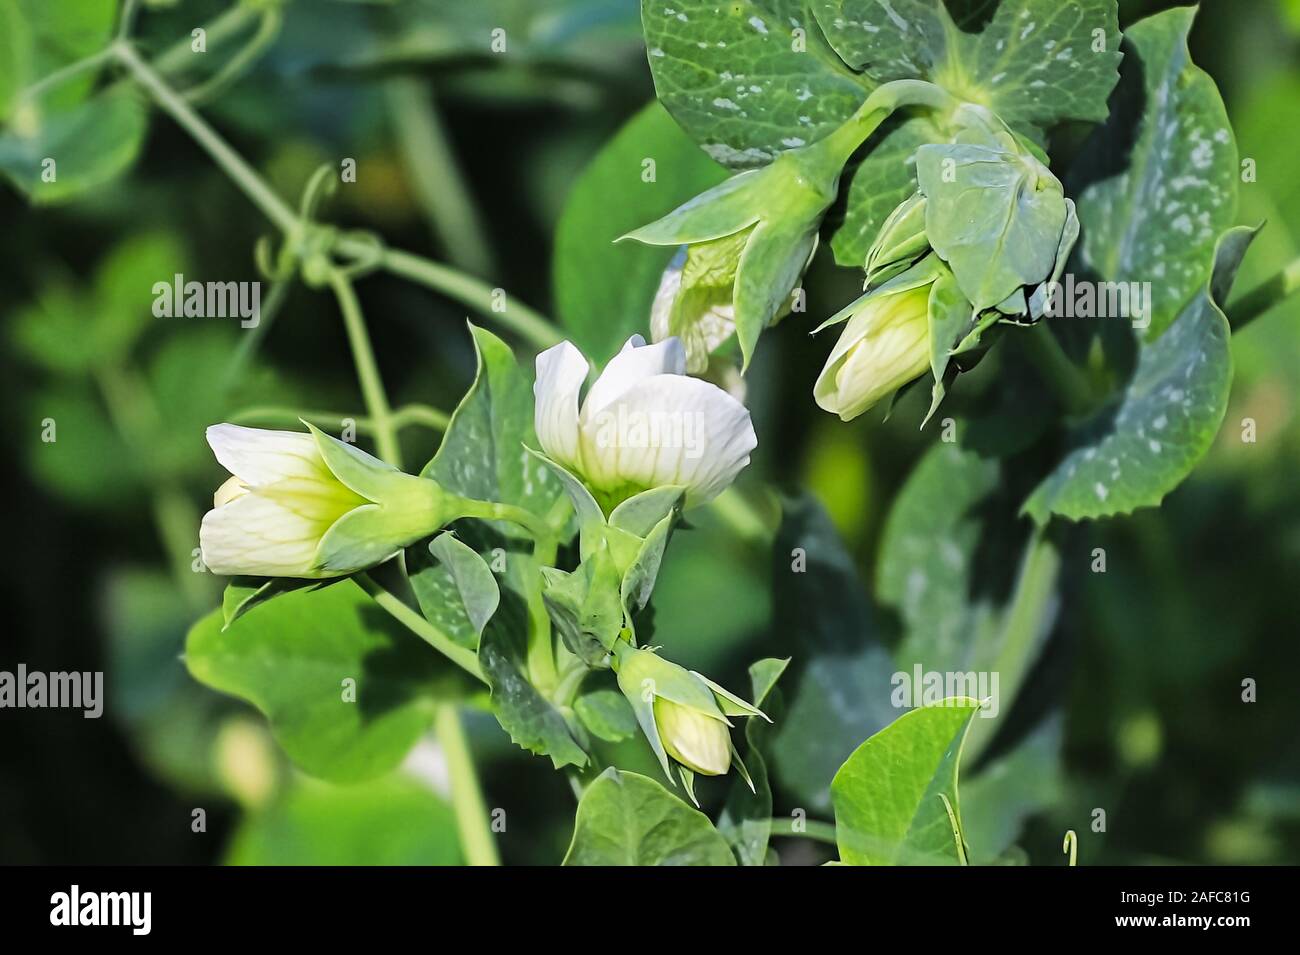 Detailed view of pea flowers growing on a plant Stock Photo